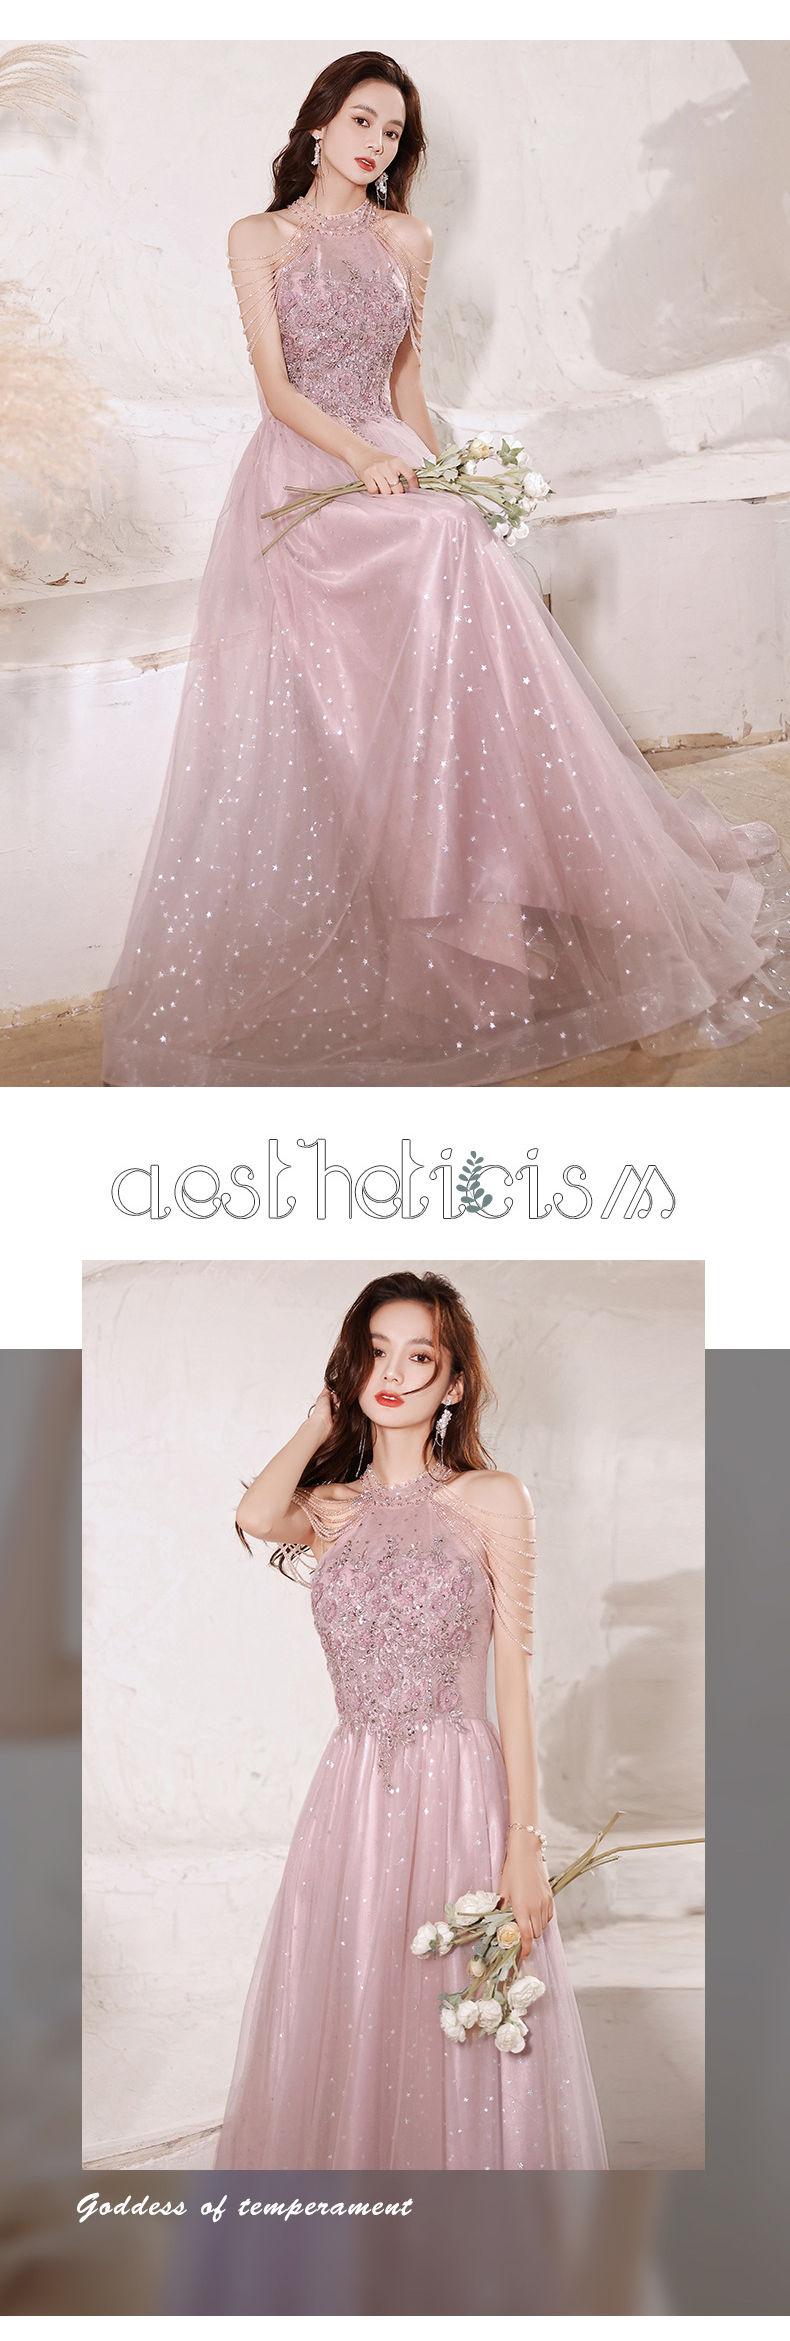 Elegant Pink Tulle Evening Gown Long Formal Prom Party Dress13